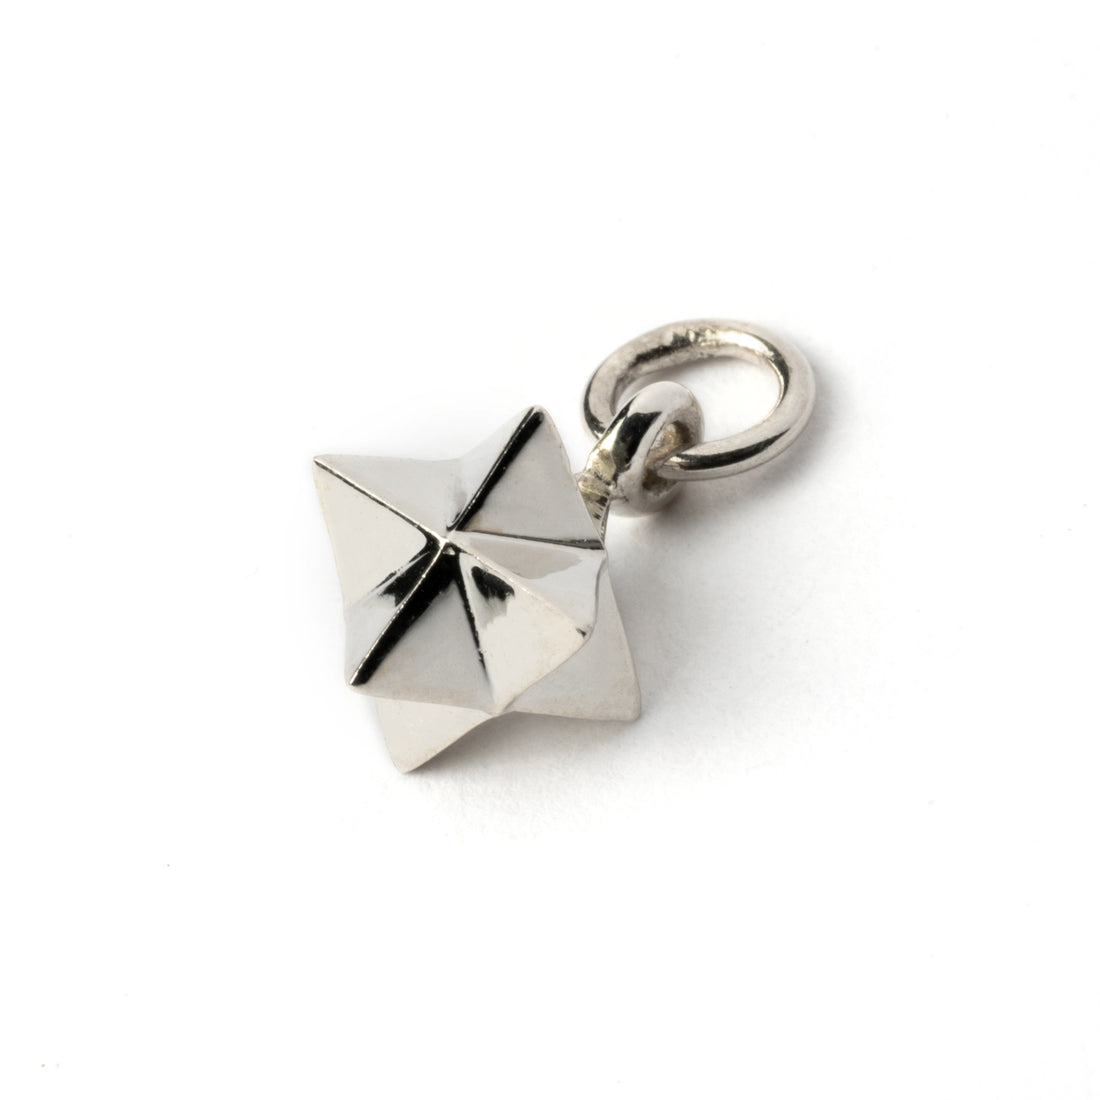 Tiny Silver Merkaba Charm necklace right side view